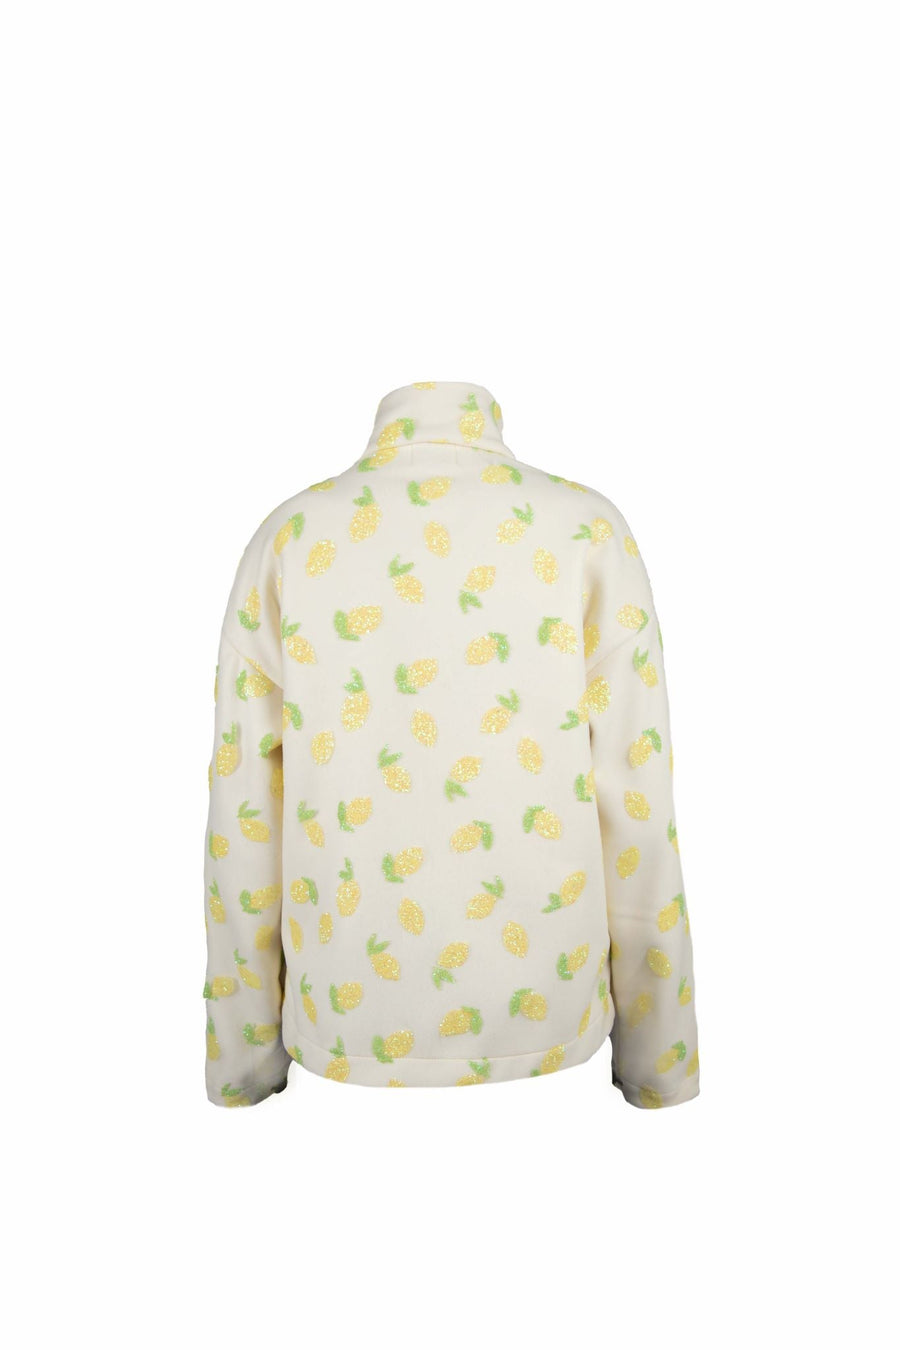 Yellow wool jacket with embroidered lemon